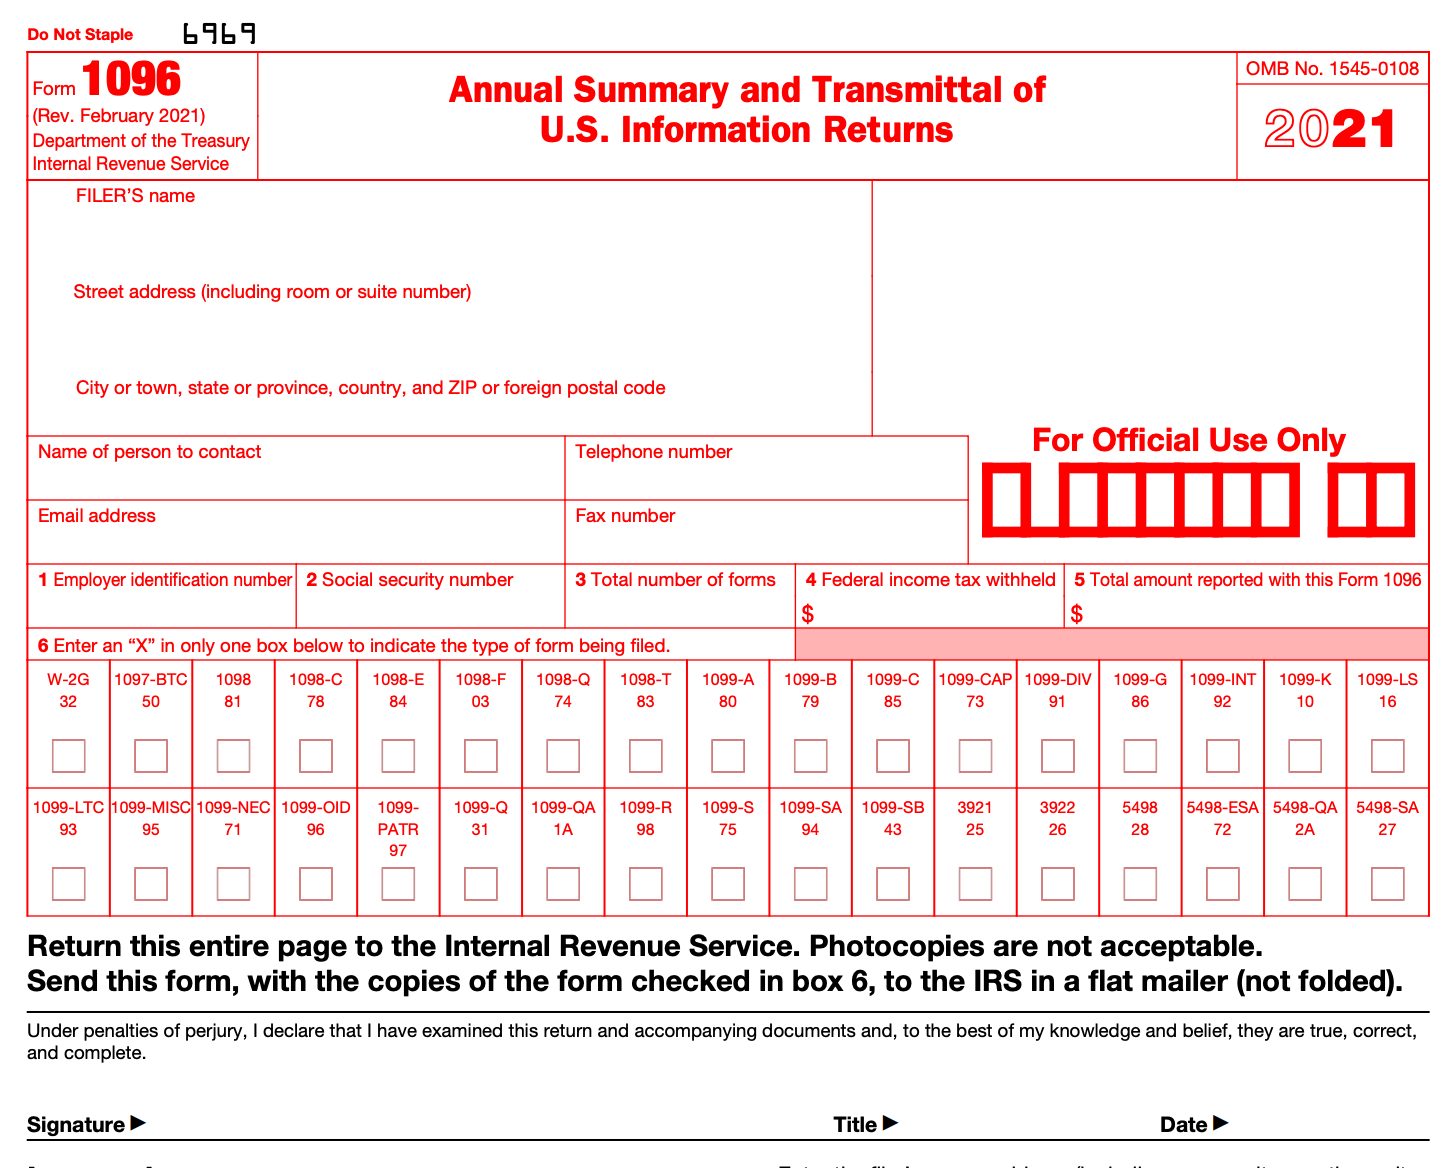 Part of Form 1096